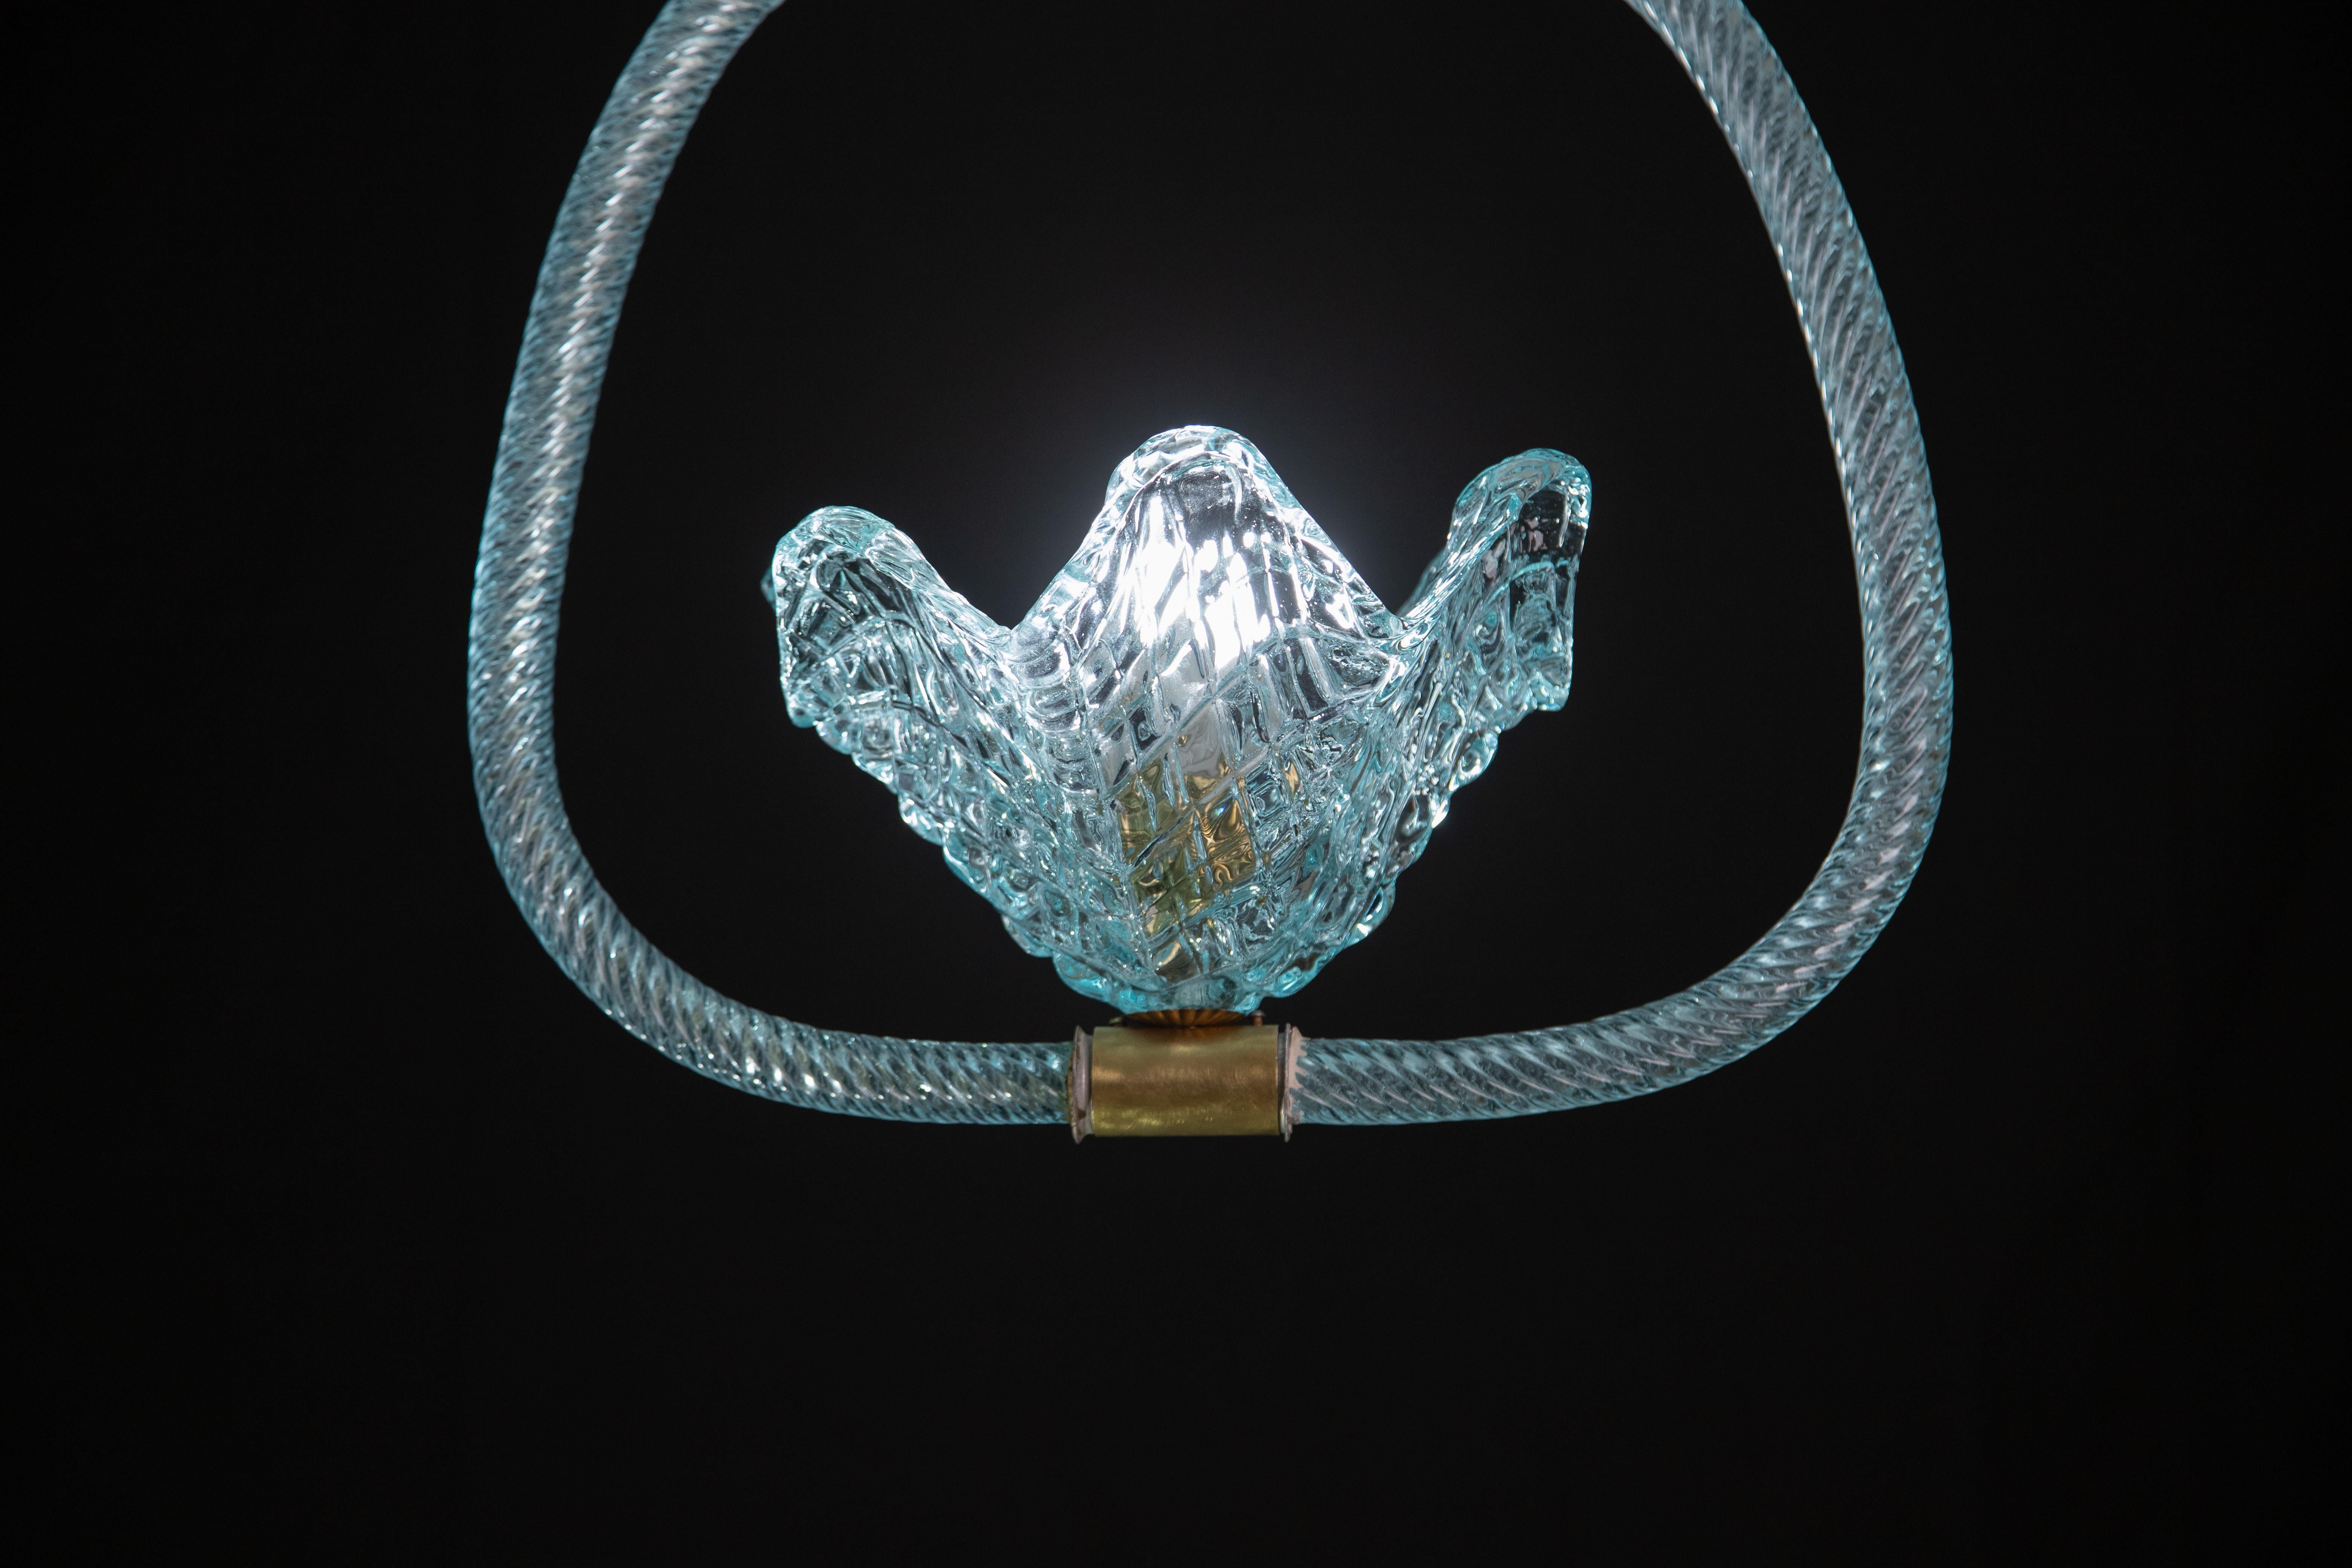 Splendid Murano chandelier made by the Barovier and Toso glassworks in the 1940s, rare 